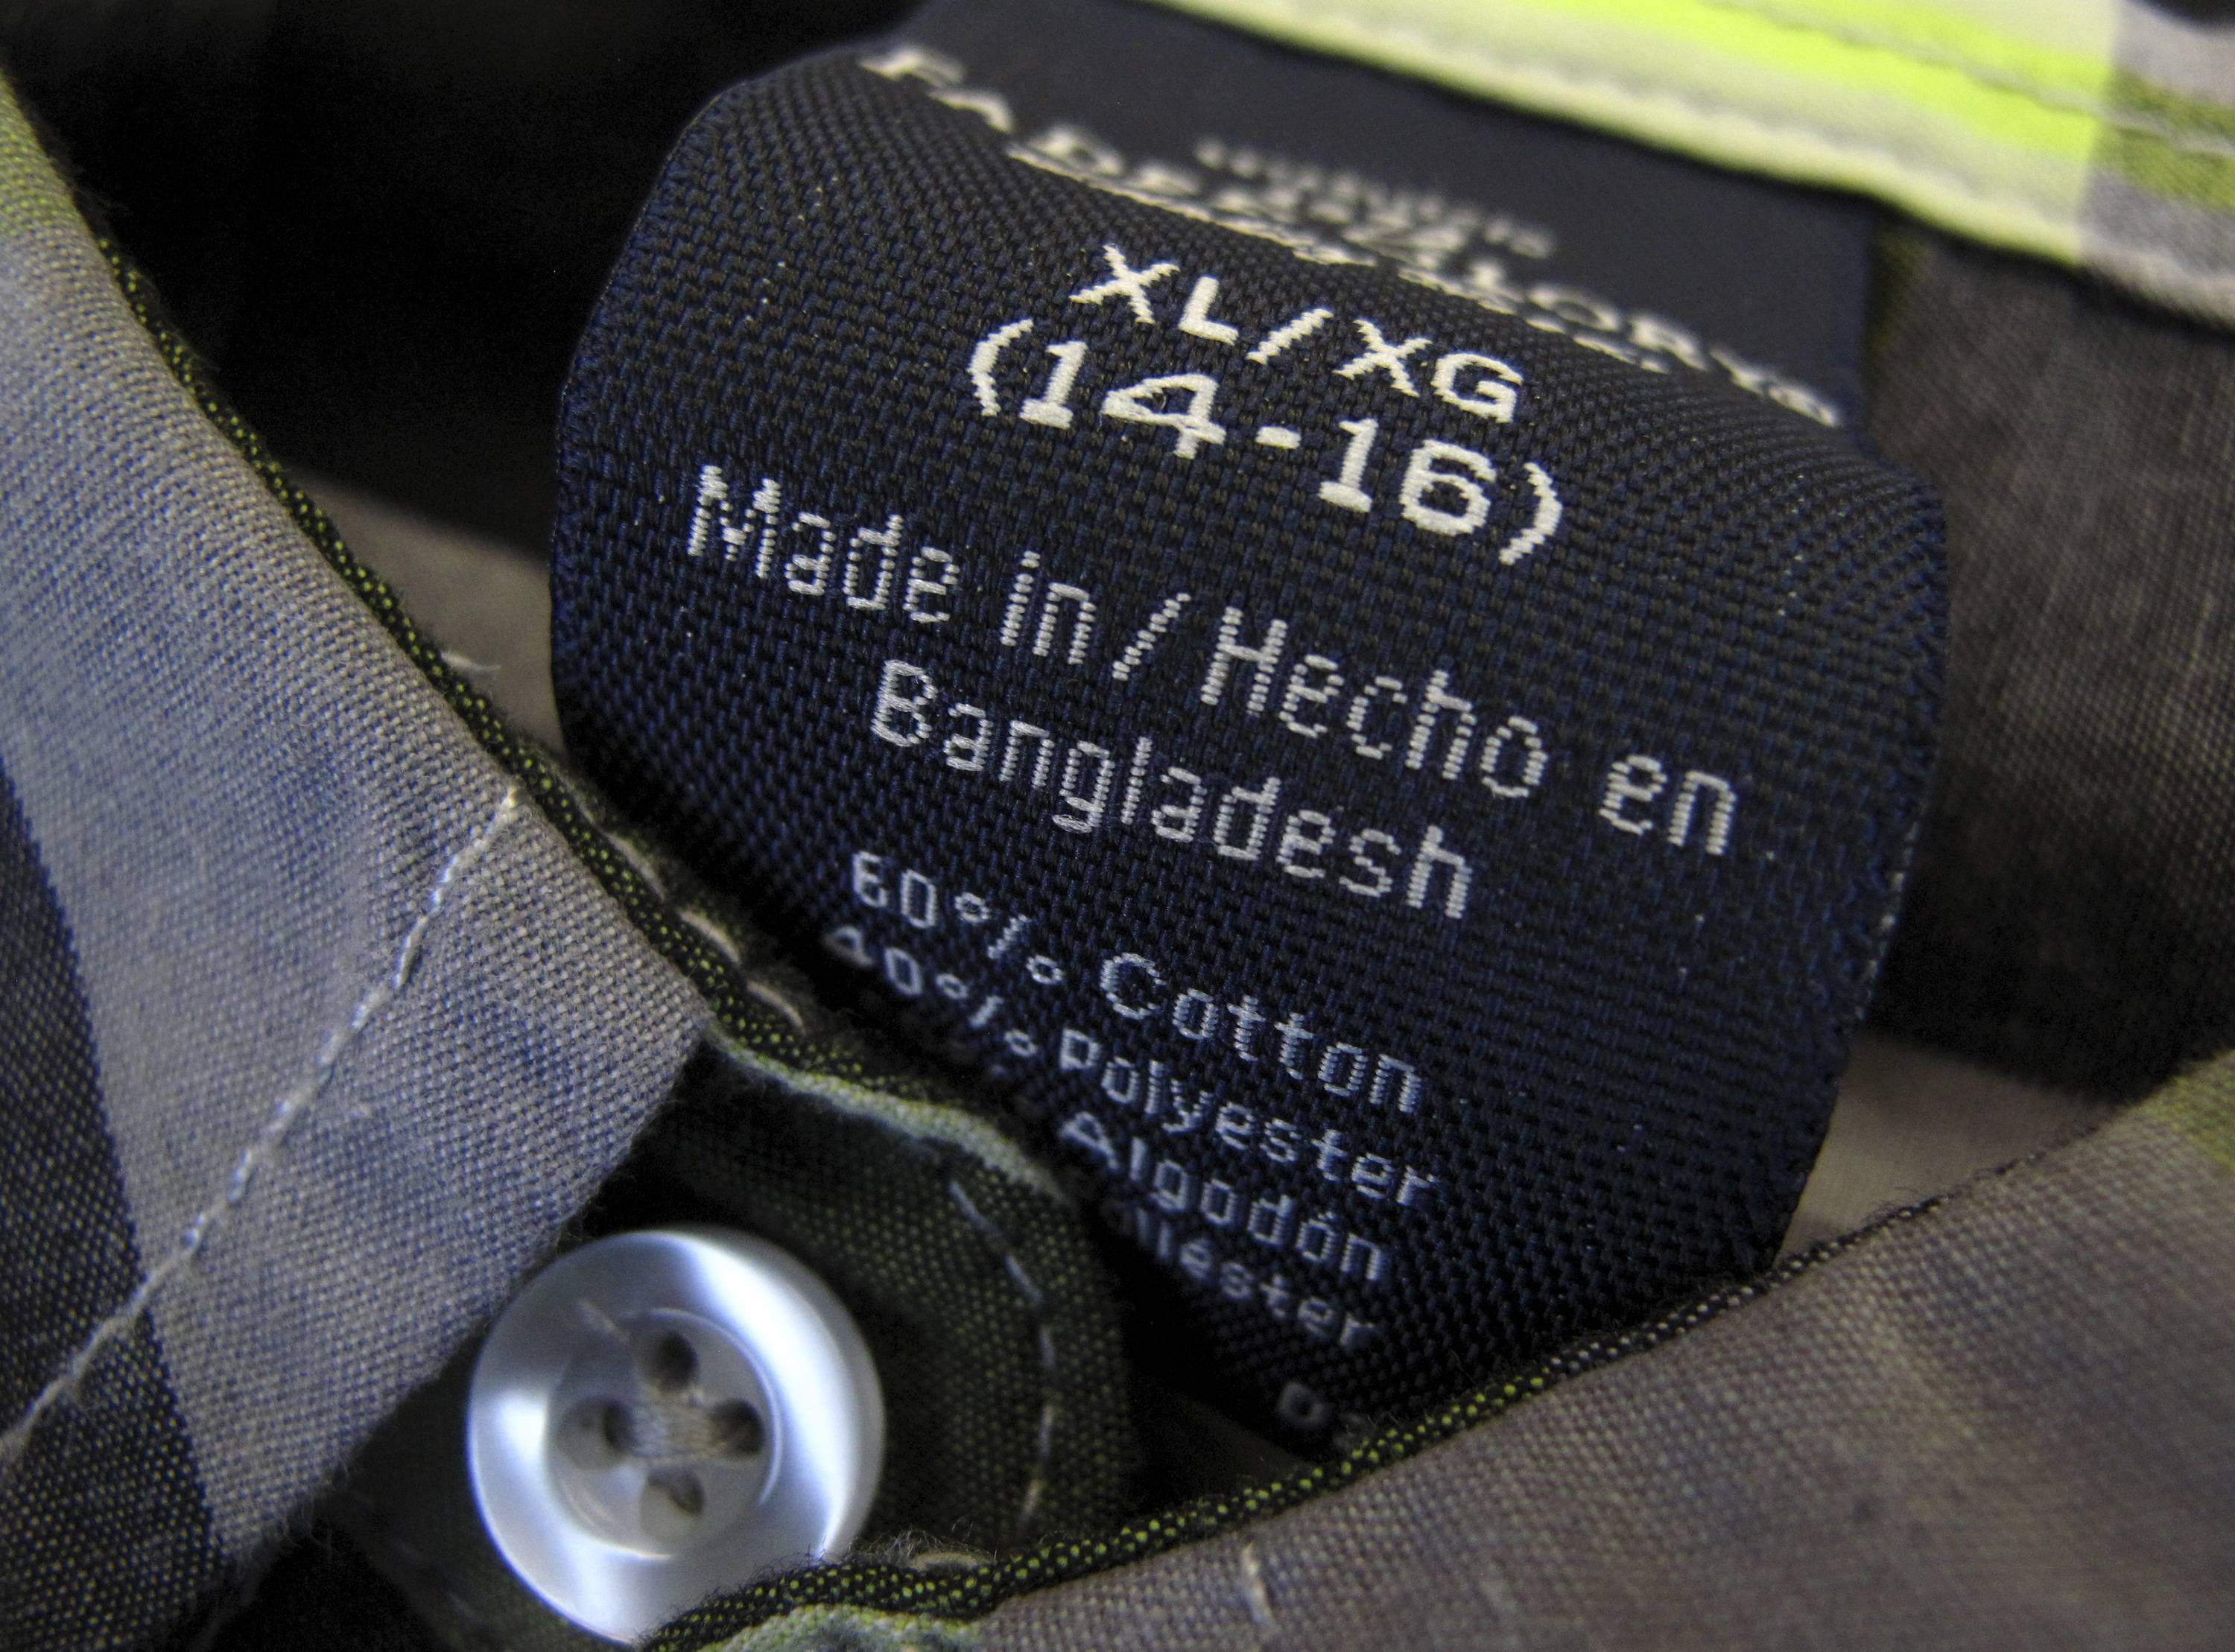 Global brands commit to Bangladesh safety after collapse